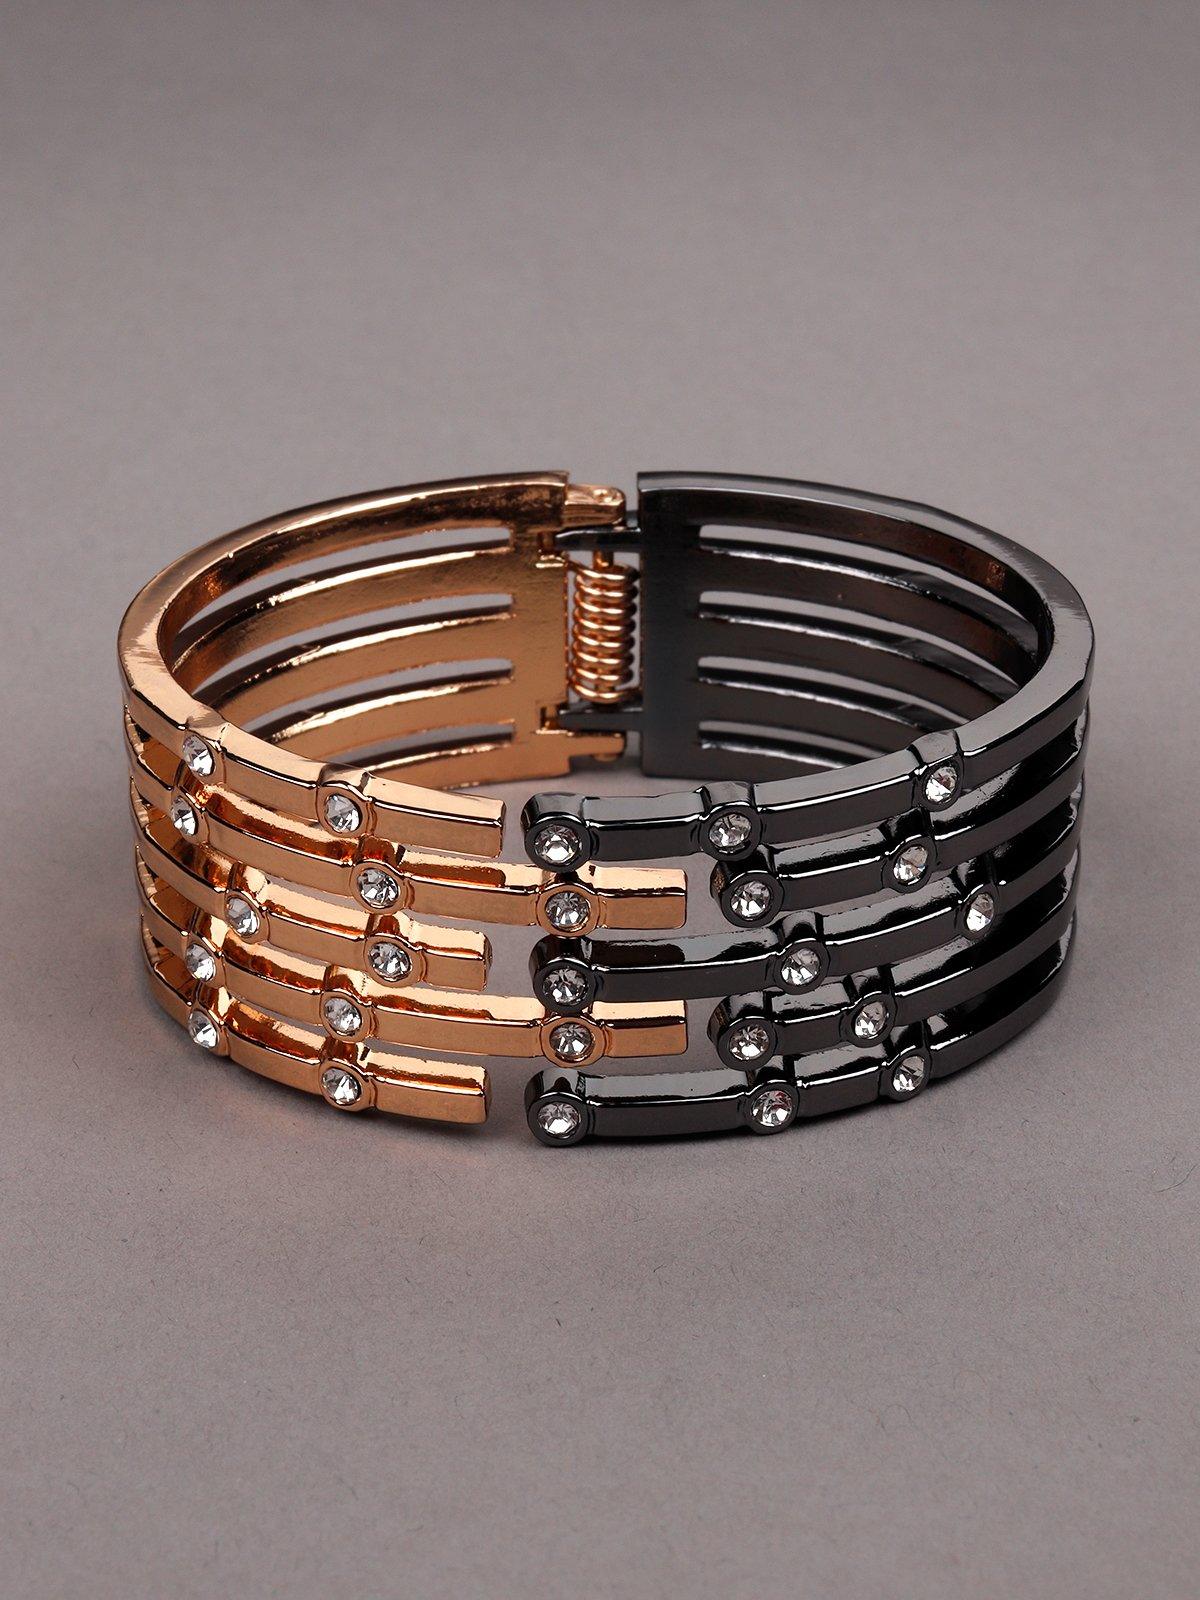 Women's Dual Coloured Gold And Smoke Silver Bracelet - Odette